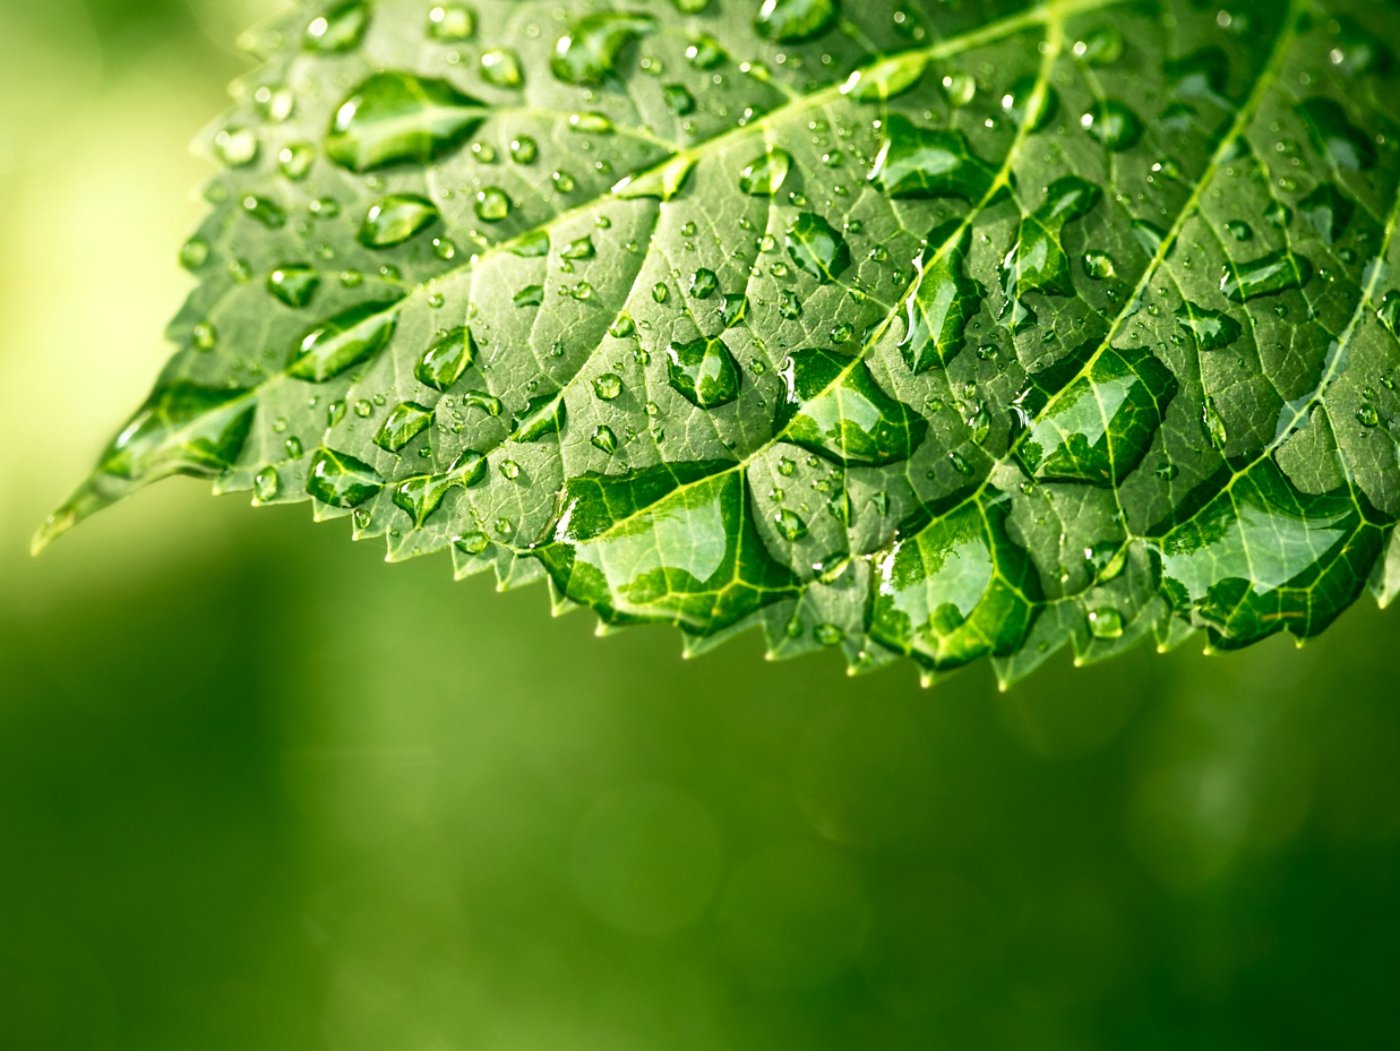 Macro shot of water droplets on a leaf, copyspace in the lower area, green background, 